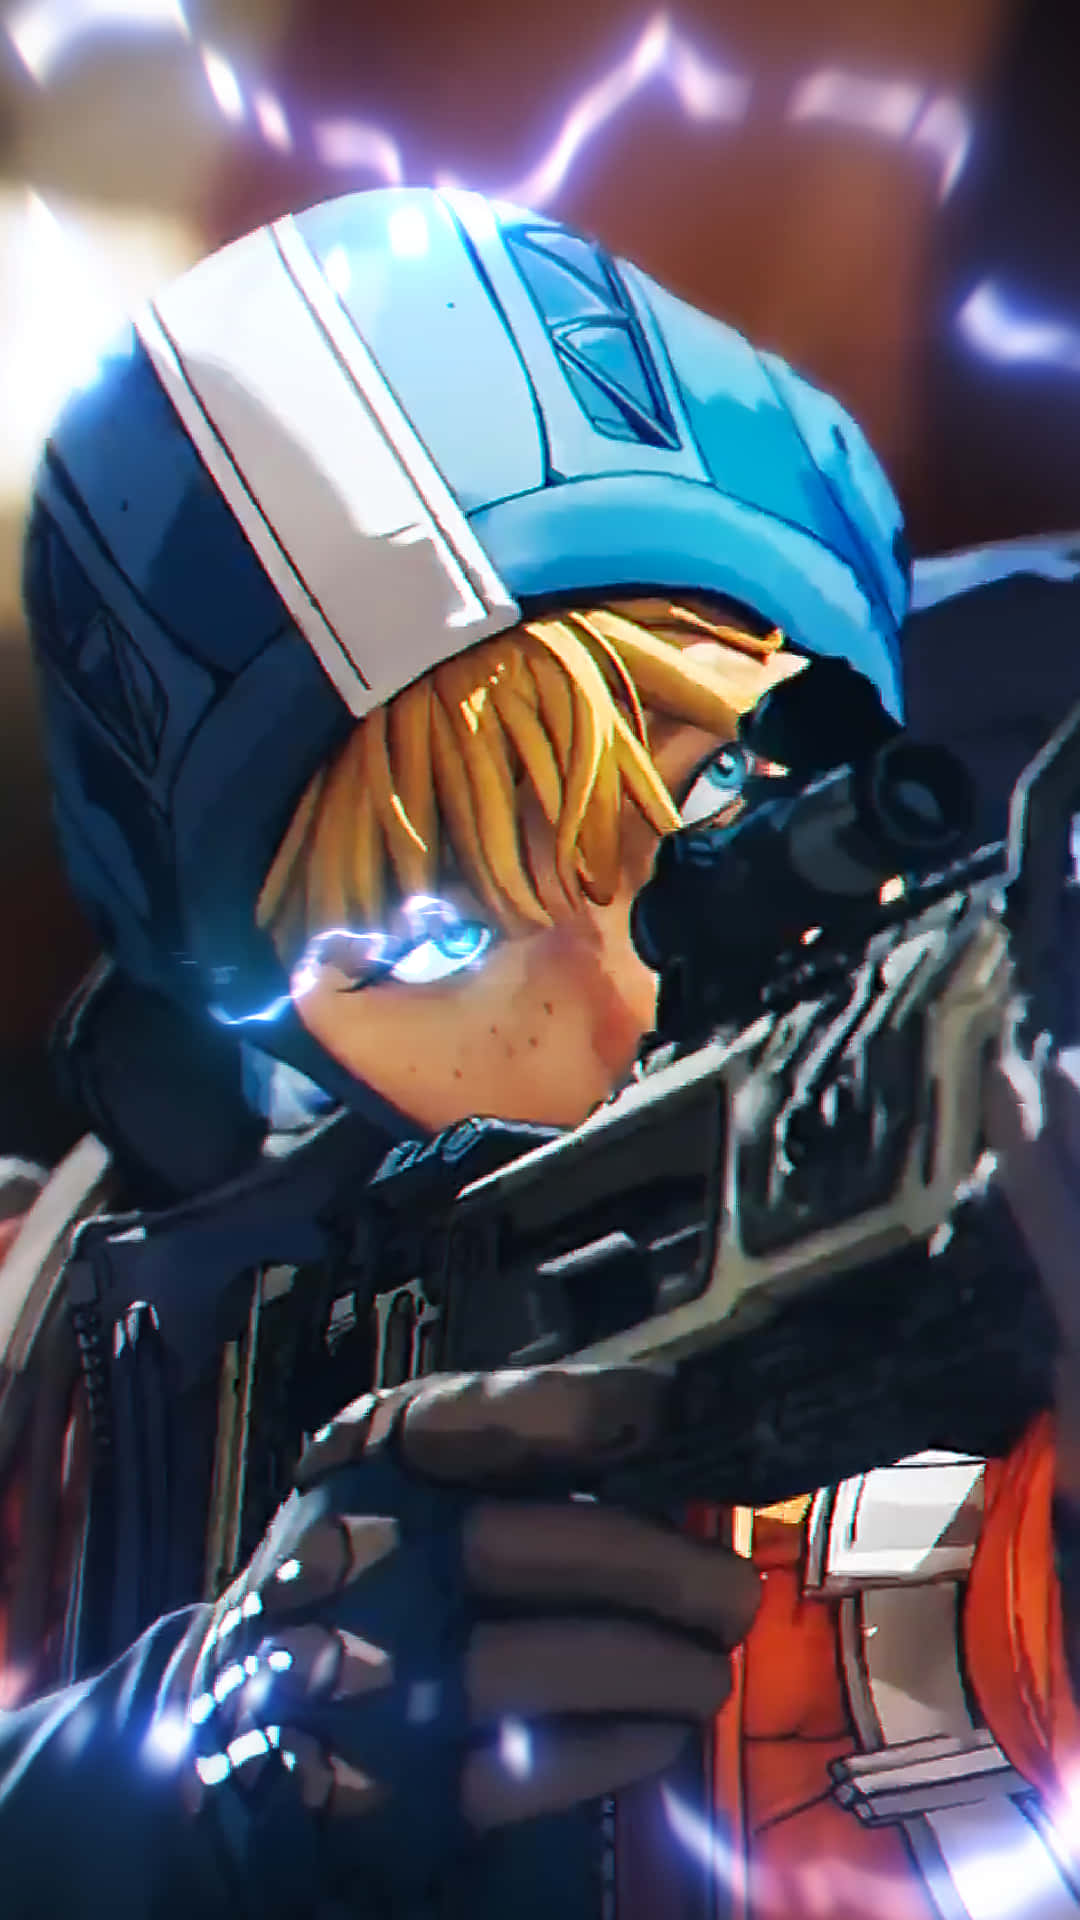 Apexlegends Wattson Lightning Eyes Can Be Translated To Italian As 